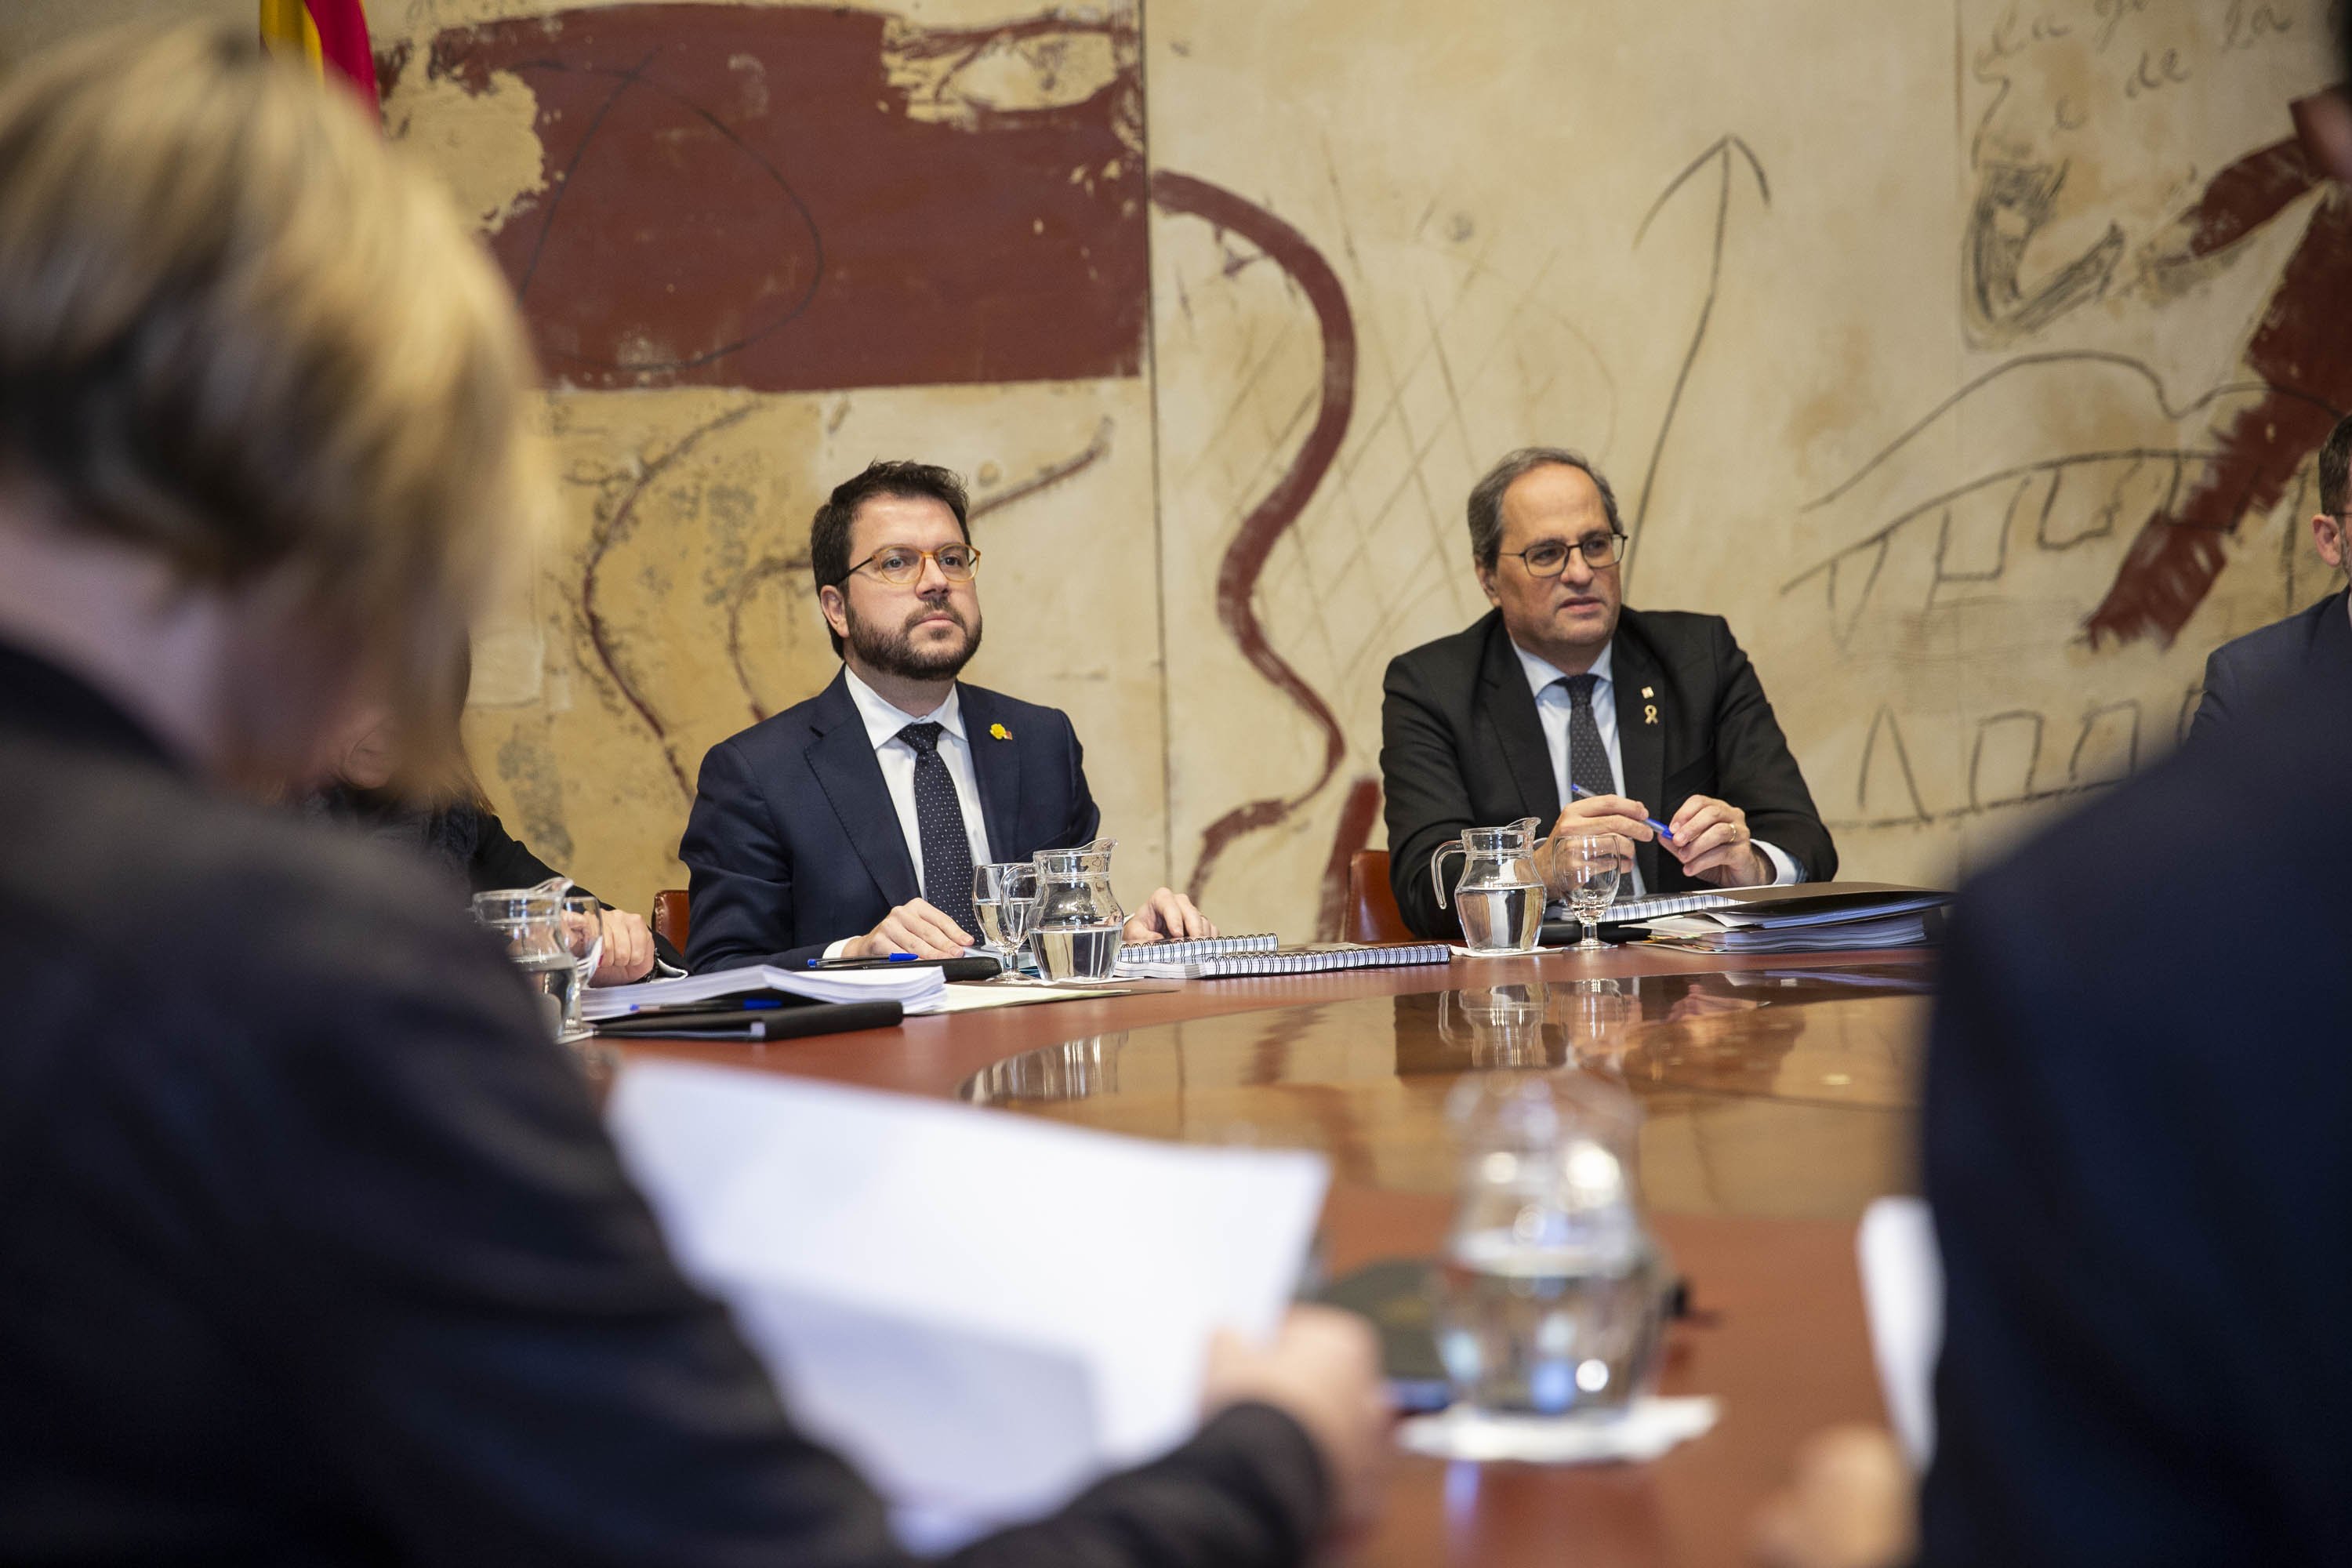 Catalan government names its dialogue team and is criticised by the Socialists